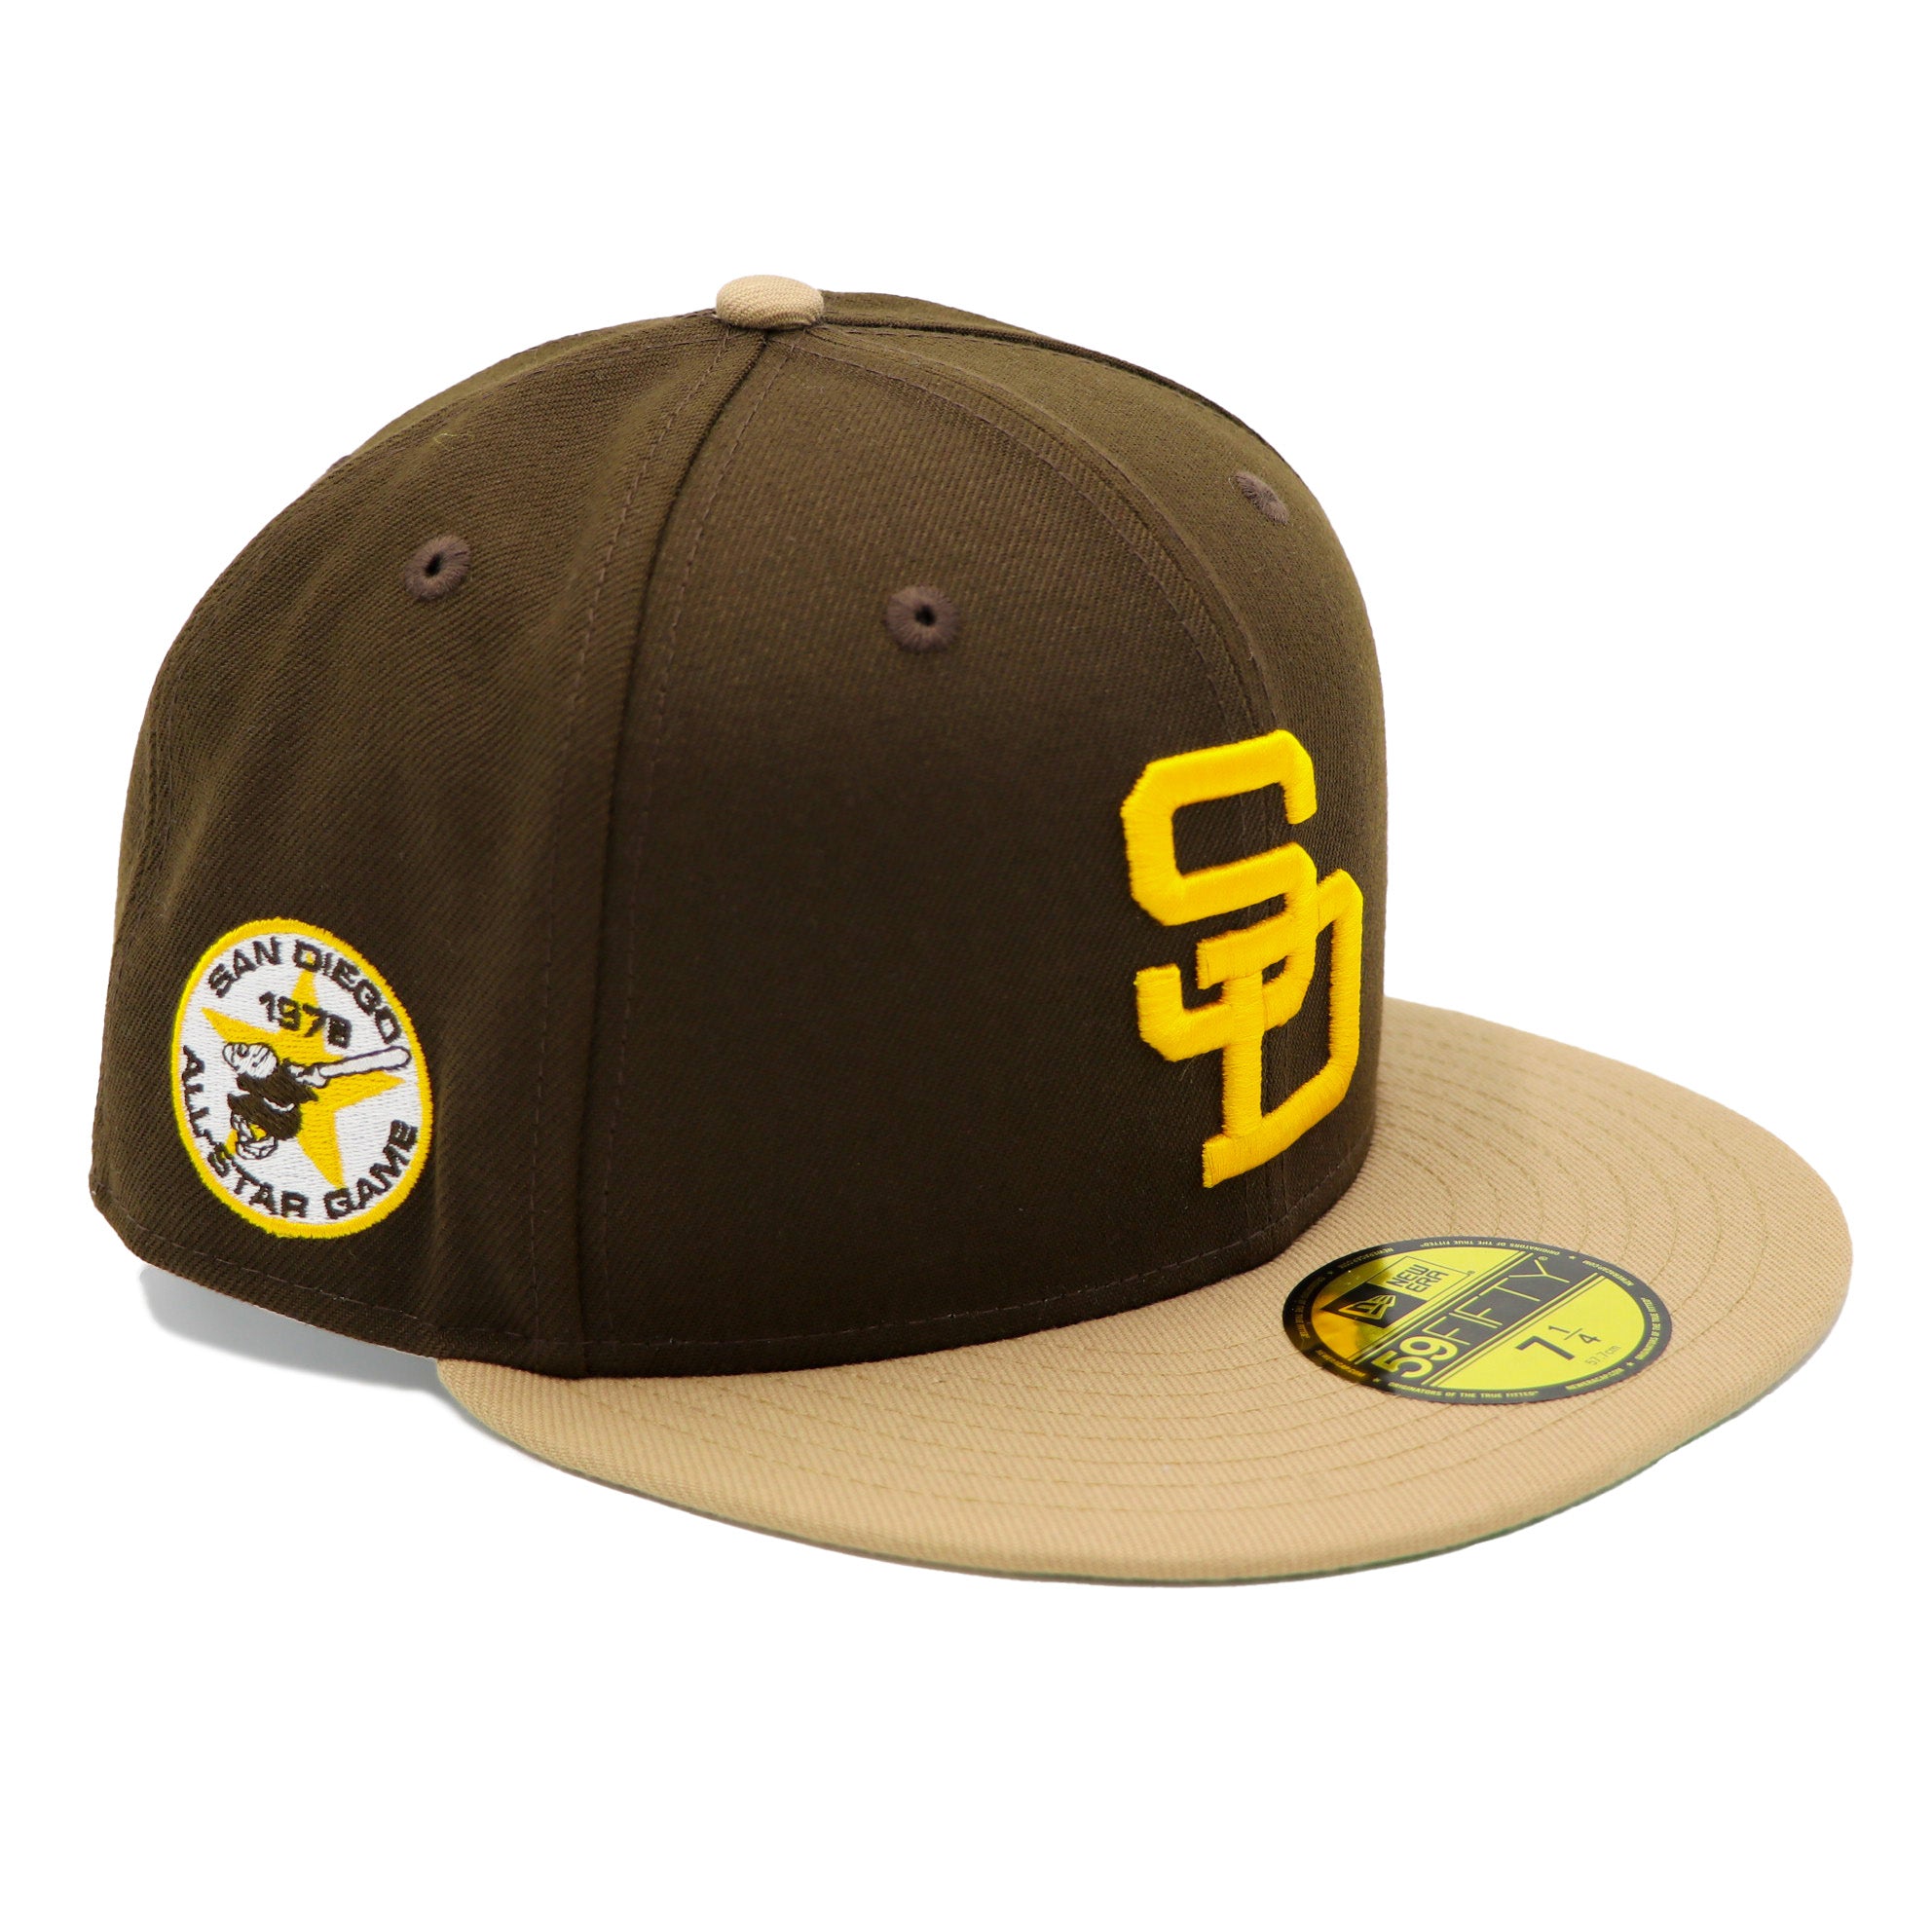 New Era 59Fifty San Diego Padres ASG 1978 2-Tone Brown/Tan Fitted